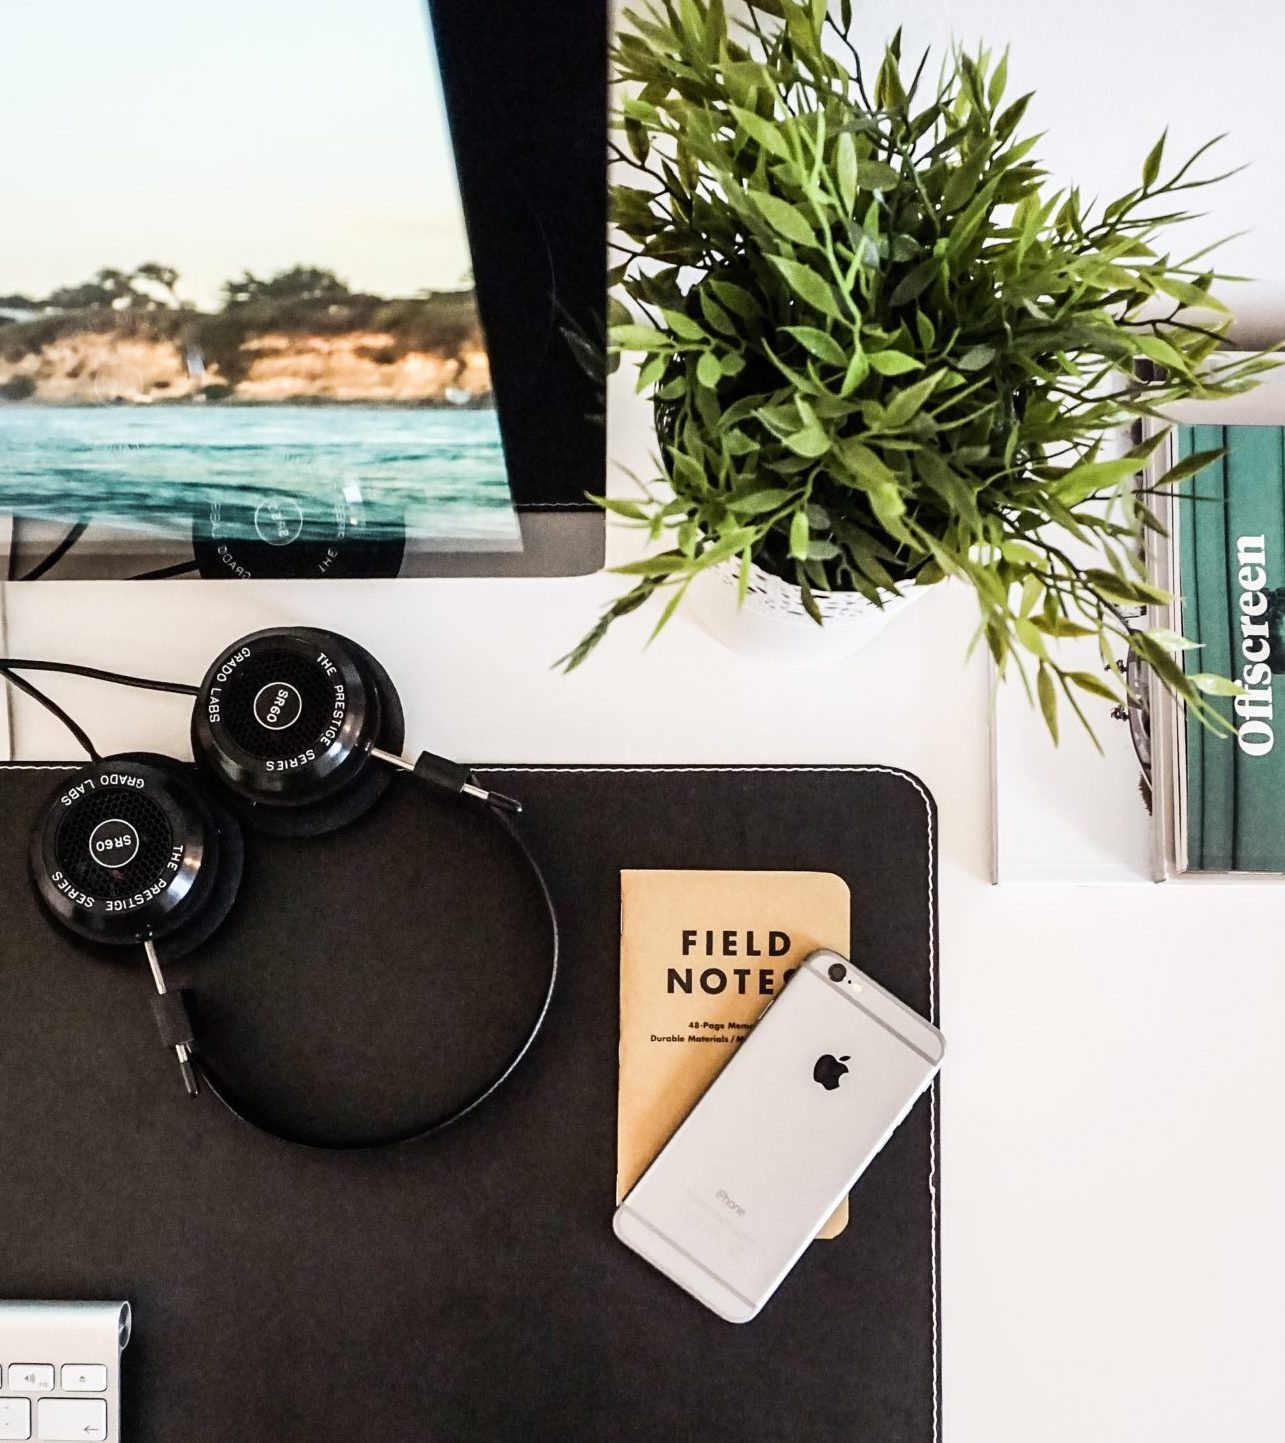 Computer, headphones, notebook, iPhone, and plant on top of white desk